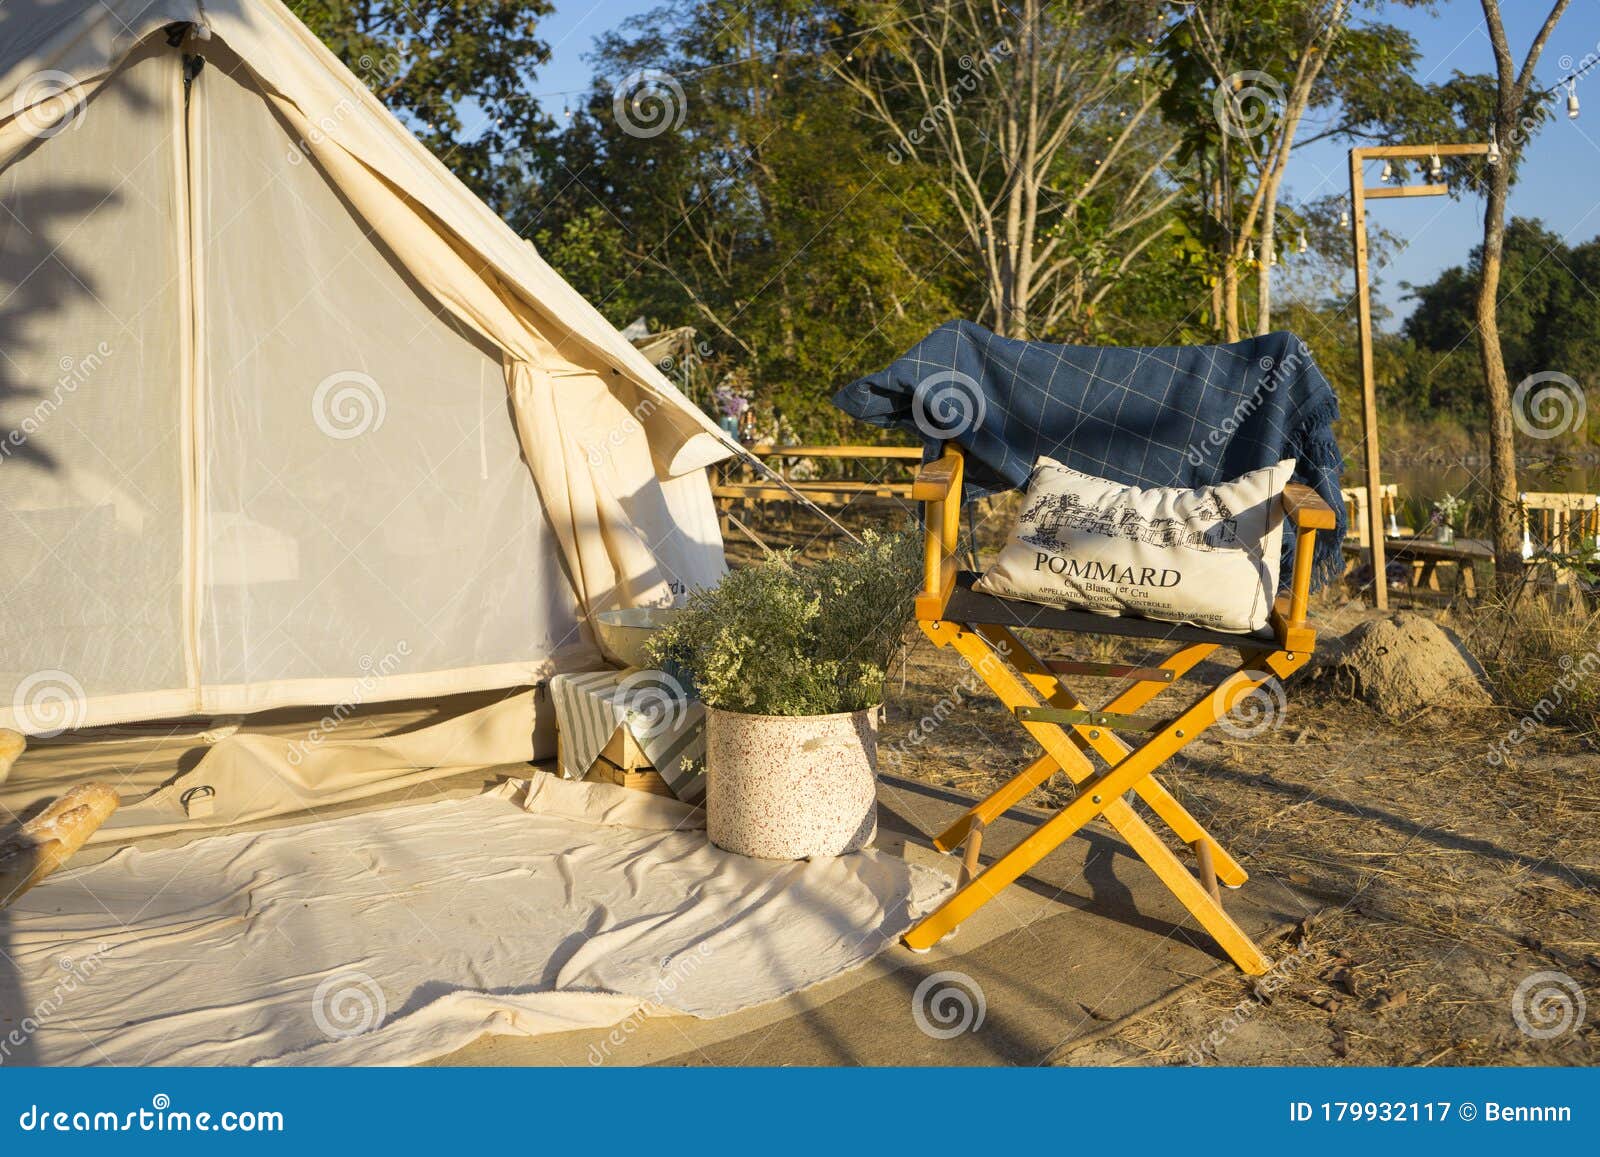 Camping Tent and Picnic Table in the Mountains. Stock Image - Image of